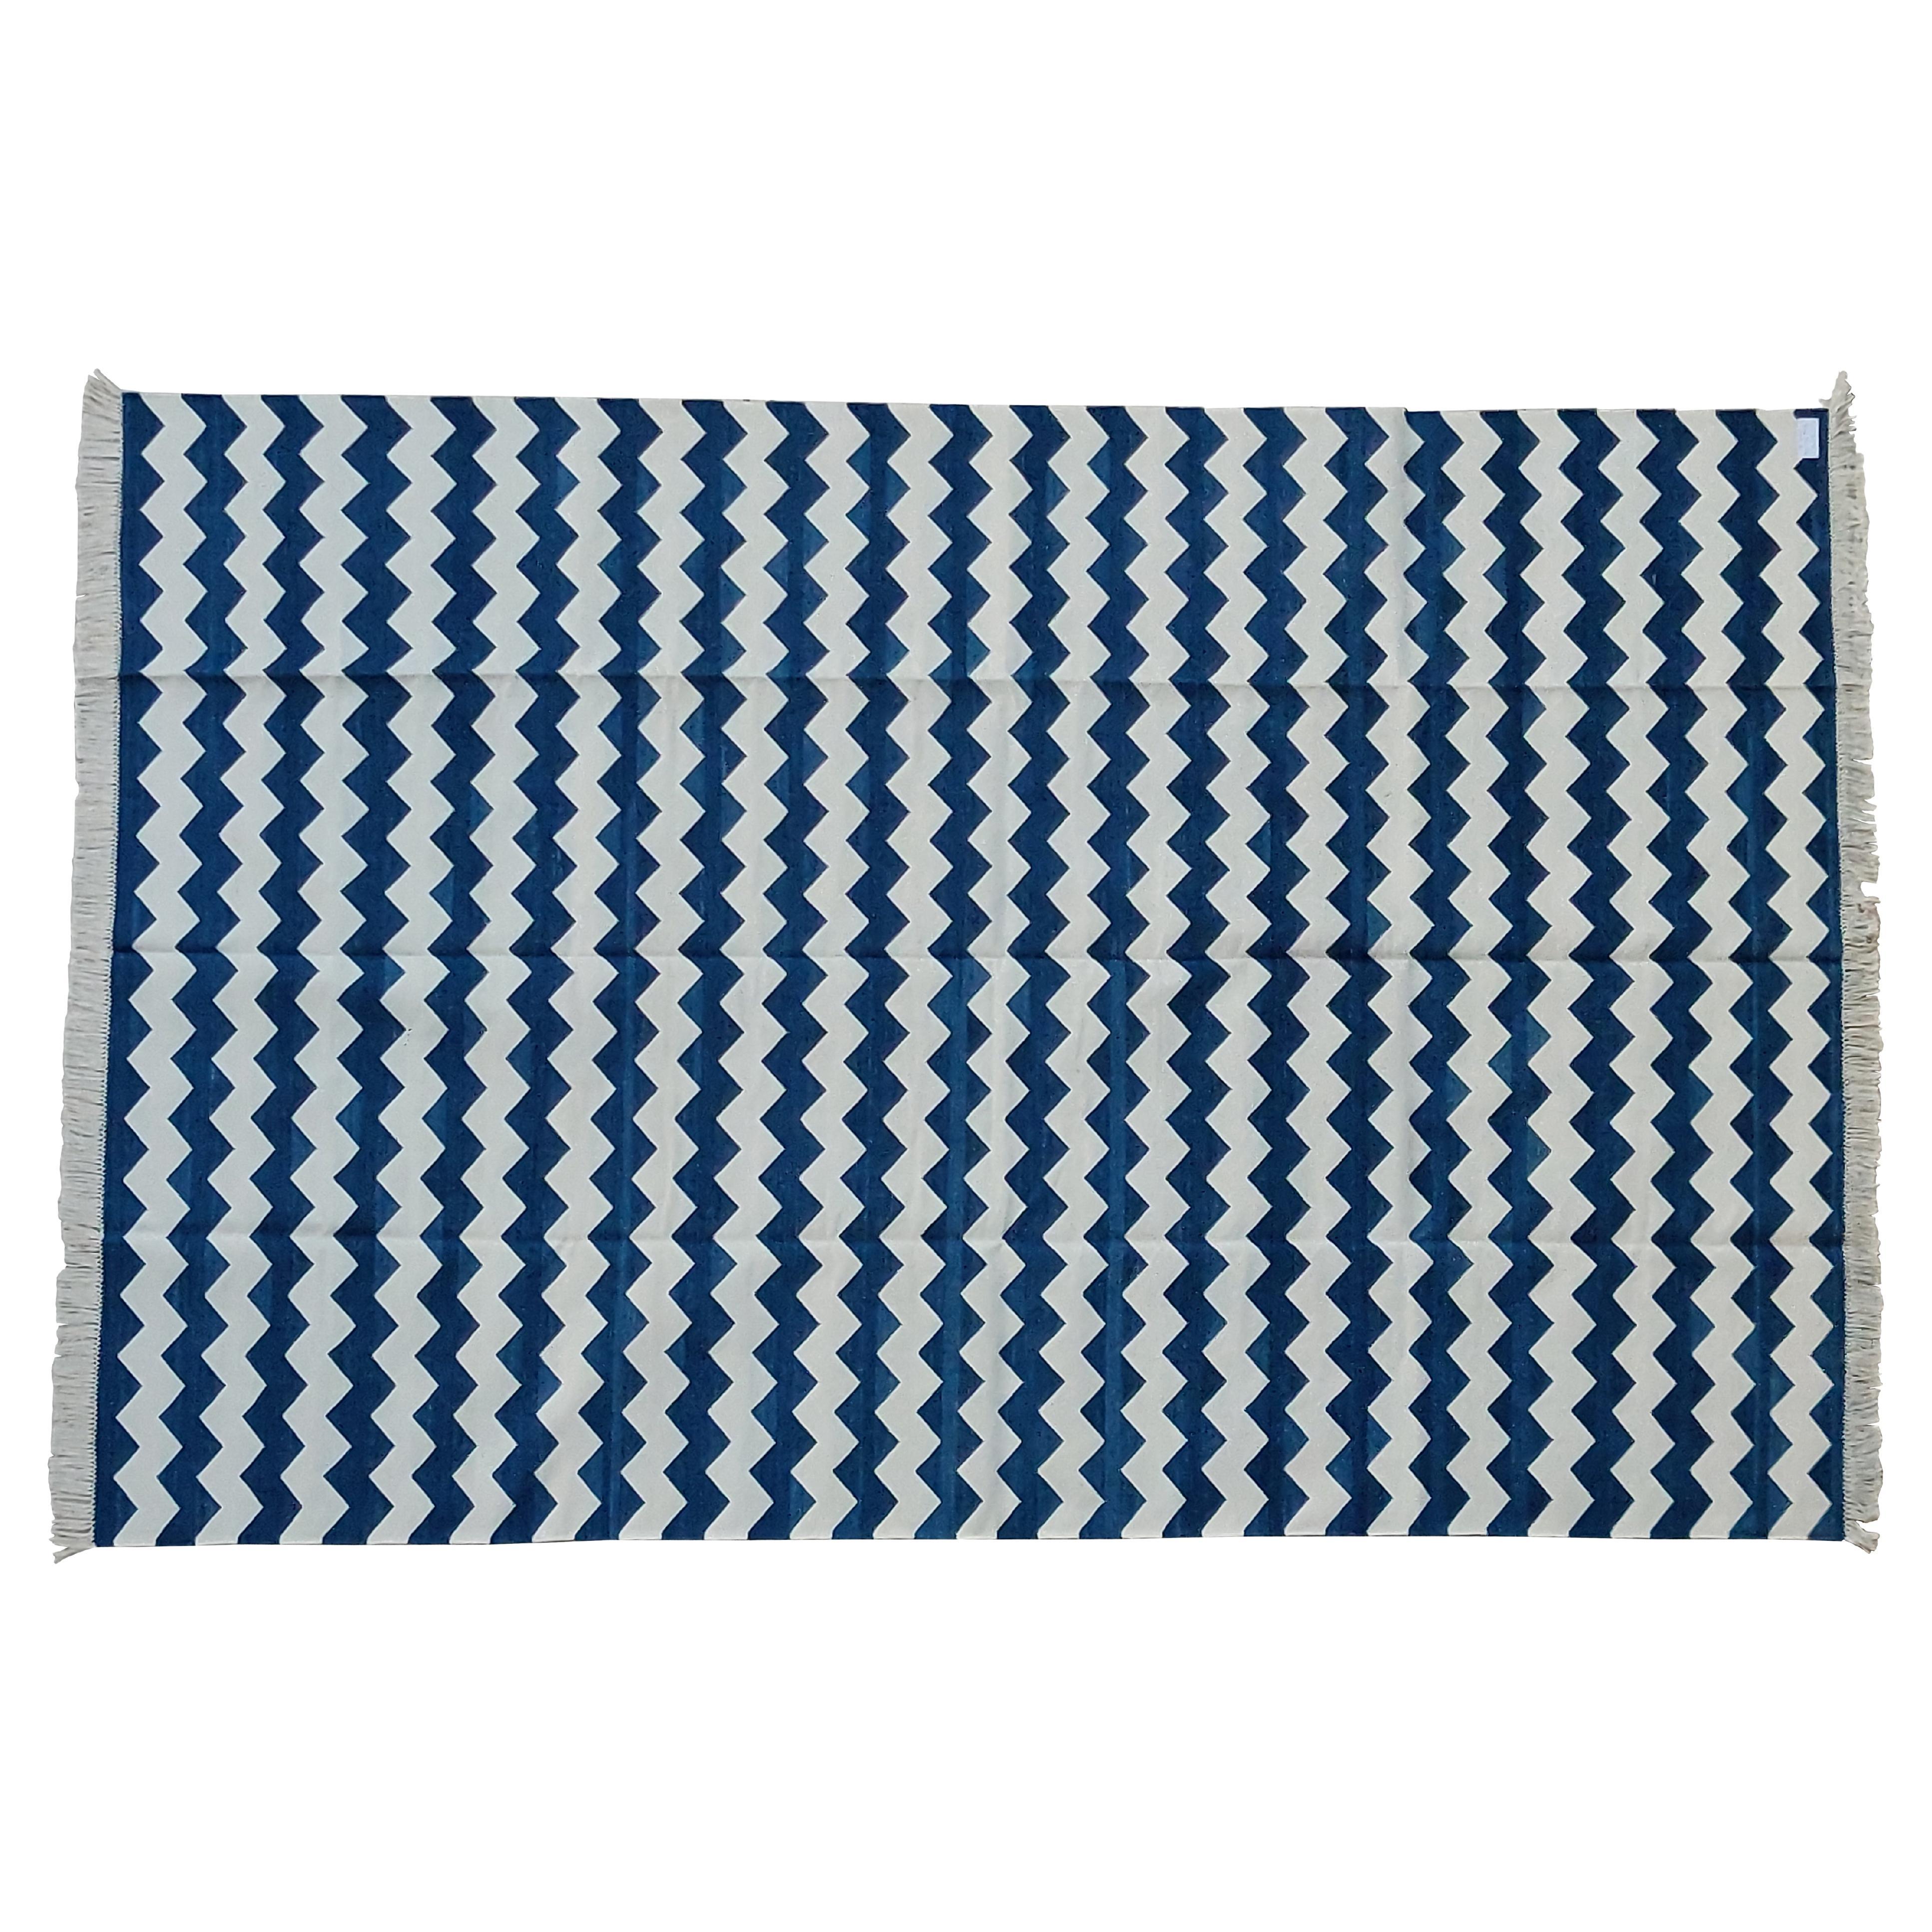 Handmade Cotton Area Flat Weave Rug, 6x9 Blue And White Zig Zag Striped Dhurrie For Sale